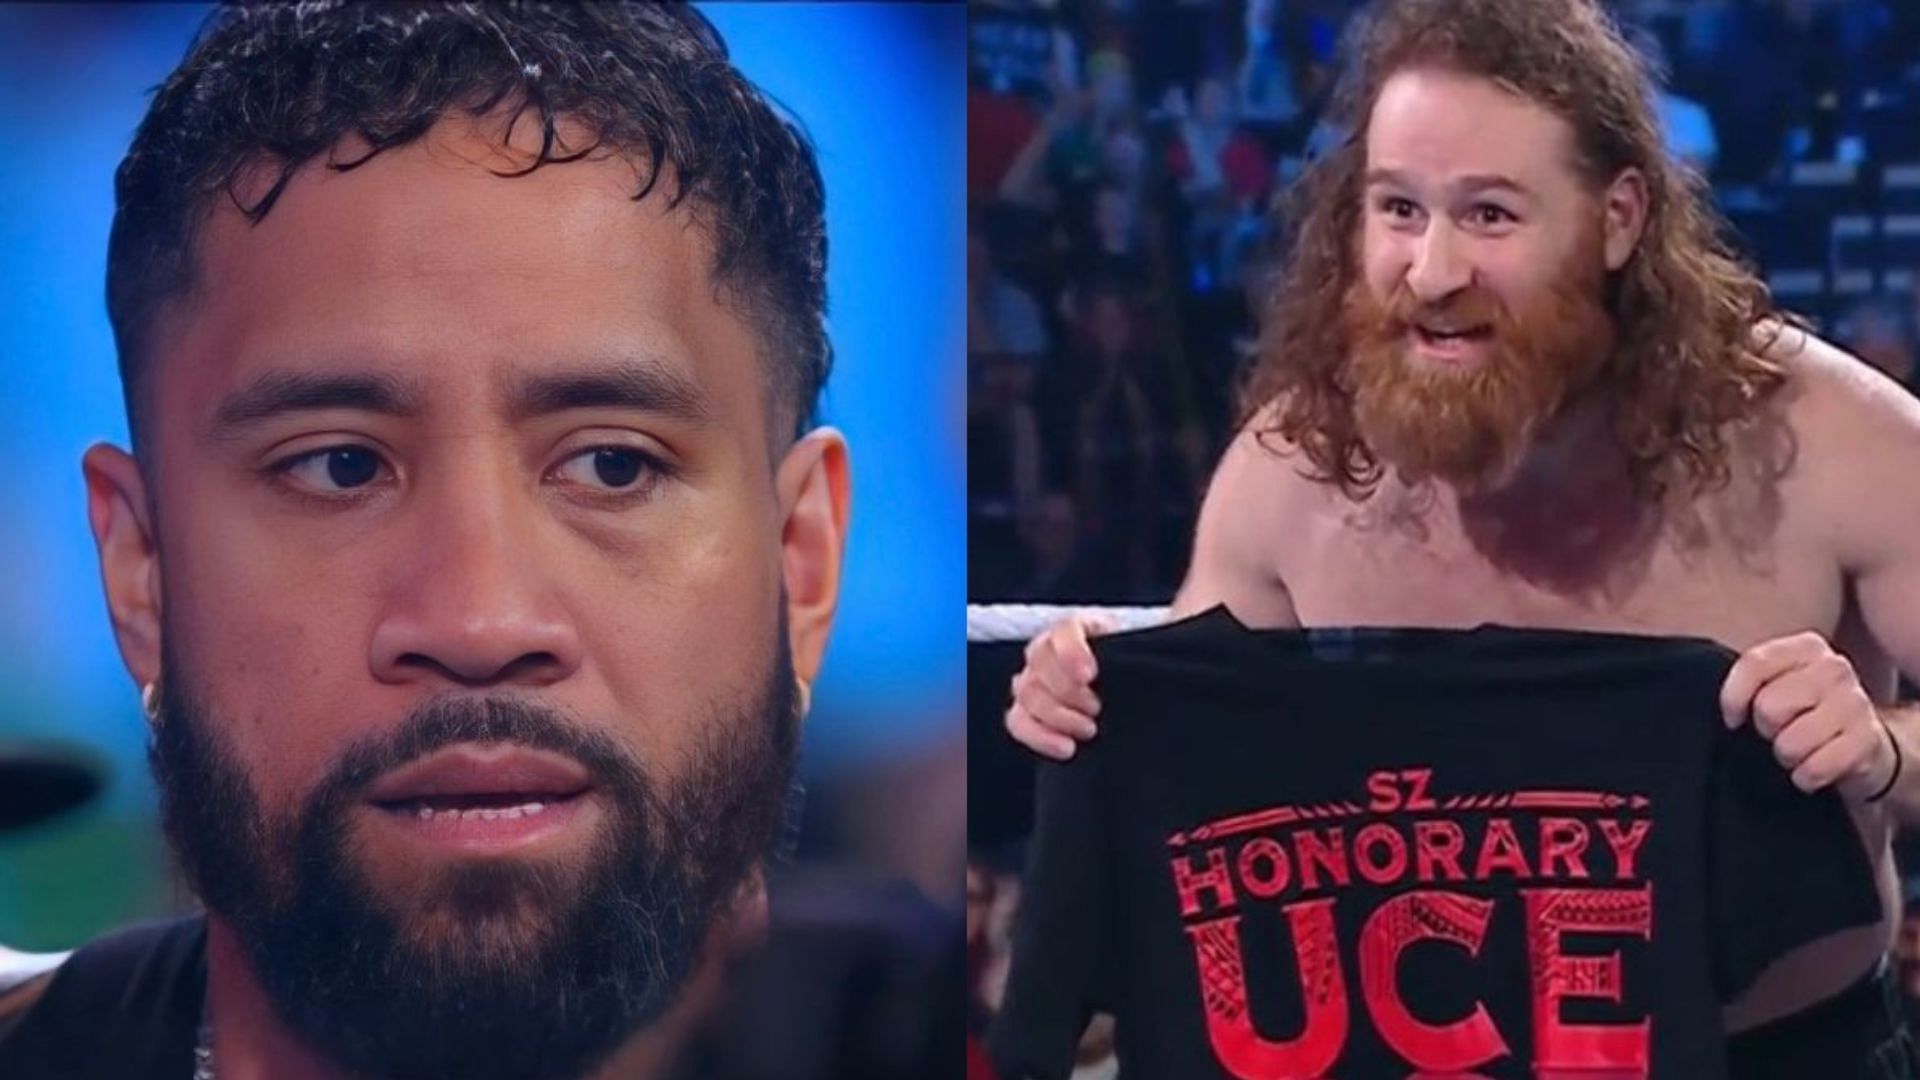 Sami Zayn and Jey Uso during a recent episode of WWE SmackDown